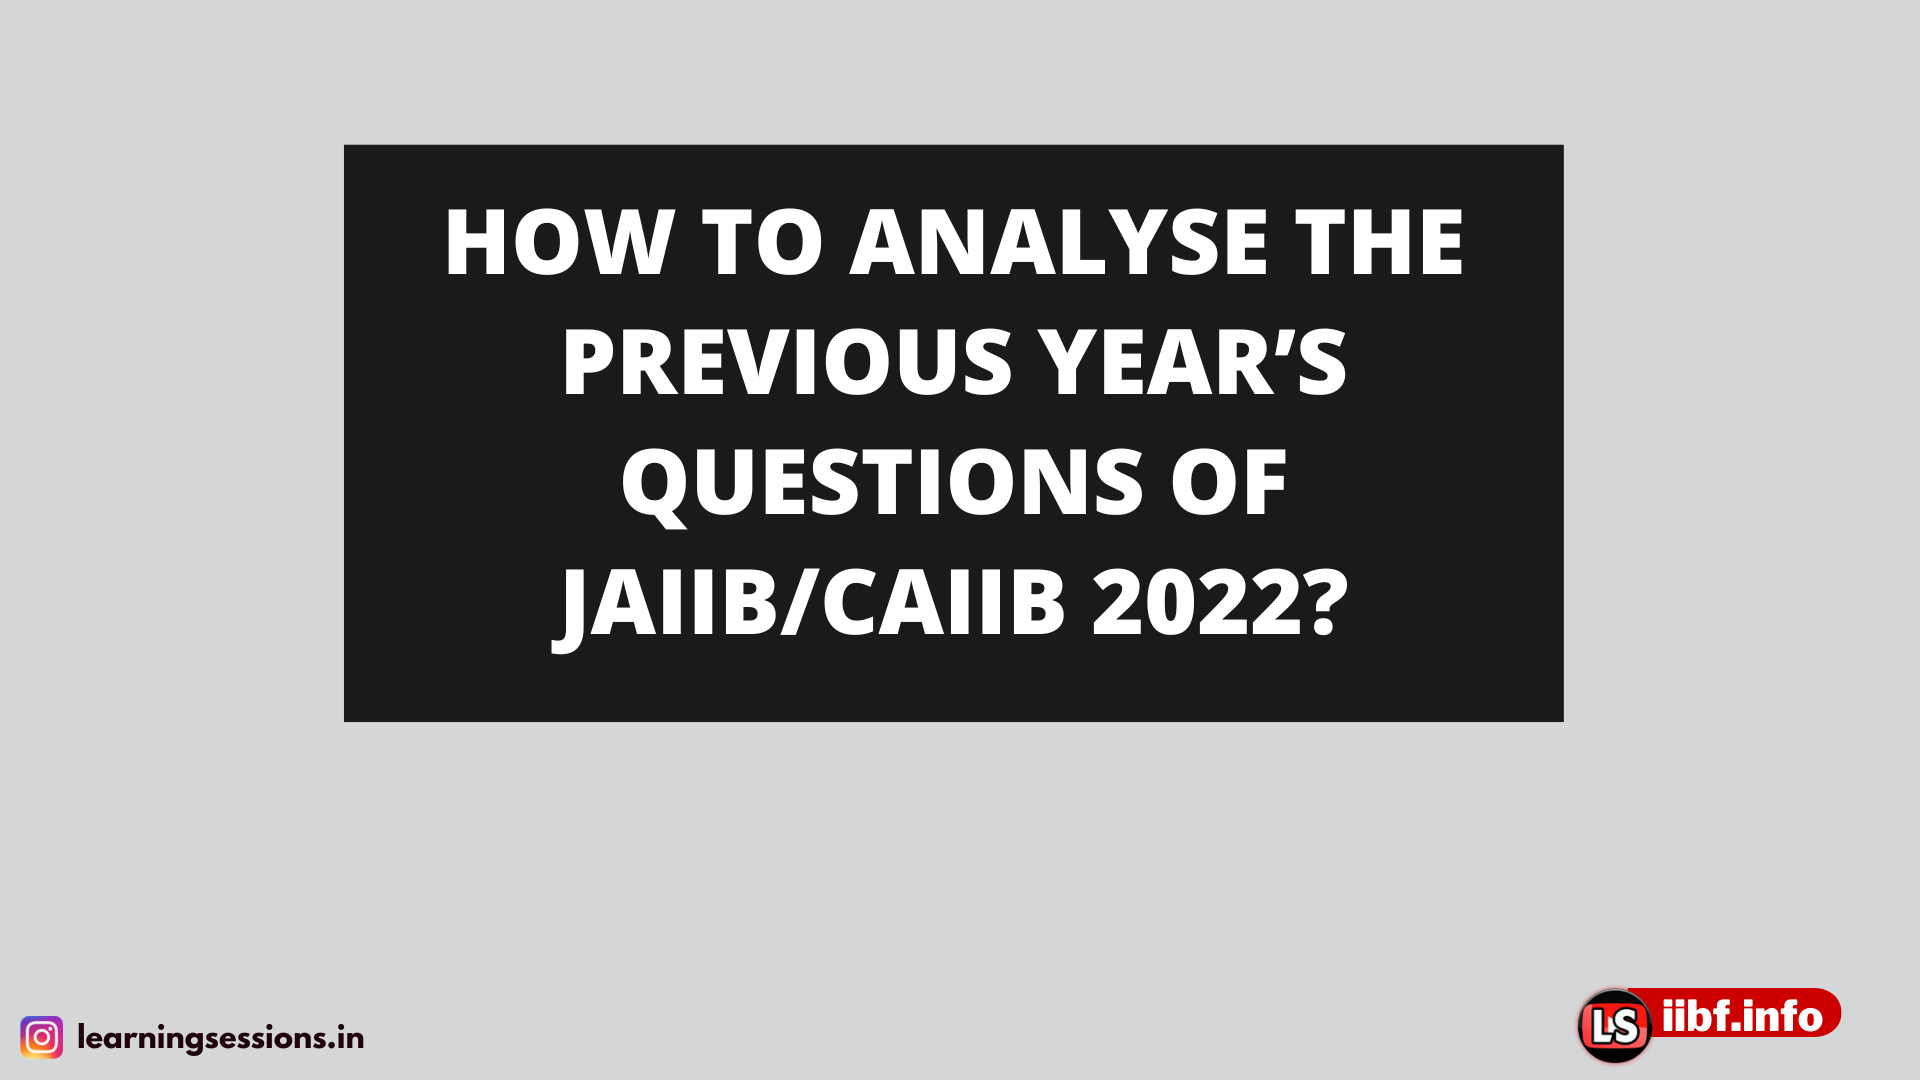 HOW TO ANALYSE THE PREVIOUS YEAR’S QUESTIONS OF JAIIB/CAIIB 2022?